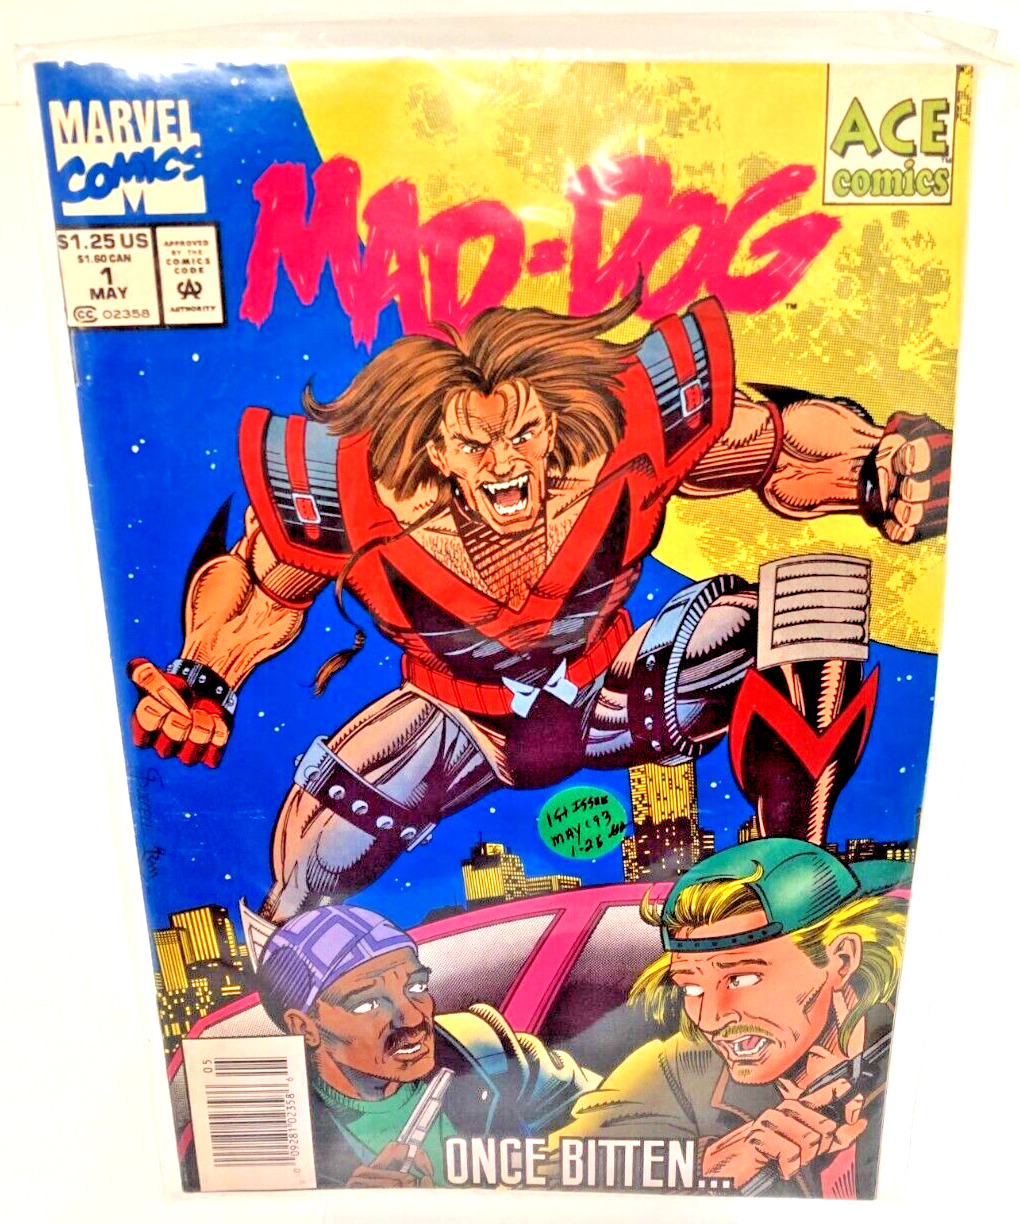 Marvel Comic Mad-Dog Volume 1 Issue 1 May 1993